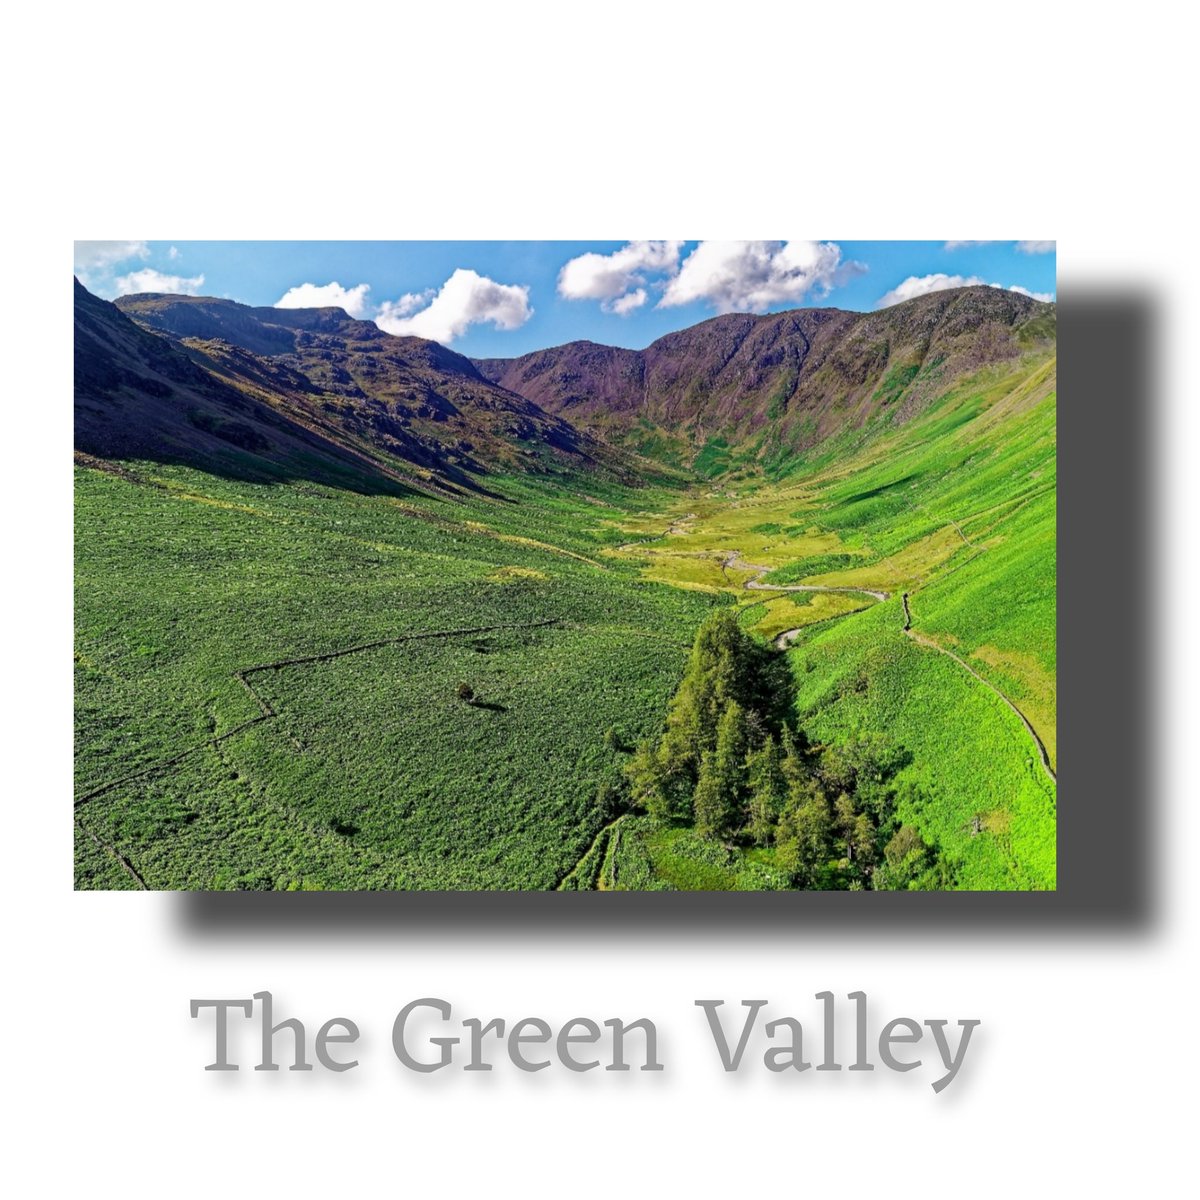 'The Green Valley'  in my shop jsdronography.etsy.com 👍#craftmakersuk #getthatgift #SmartSocial #BizBubble #shopindie #UKGiftHour #craftbizparty #NetworkWithThrive #wowwednesday #jsdronography #photography #lakedistrict #photoprints #photographycommunity #dronephotography